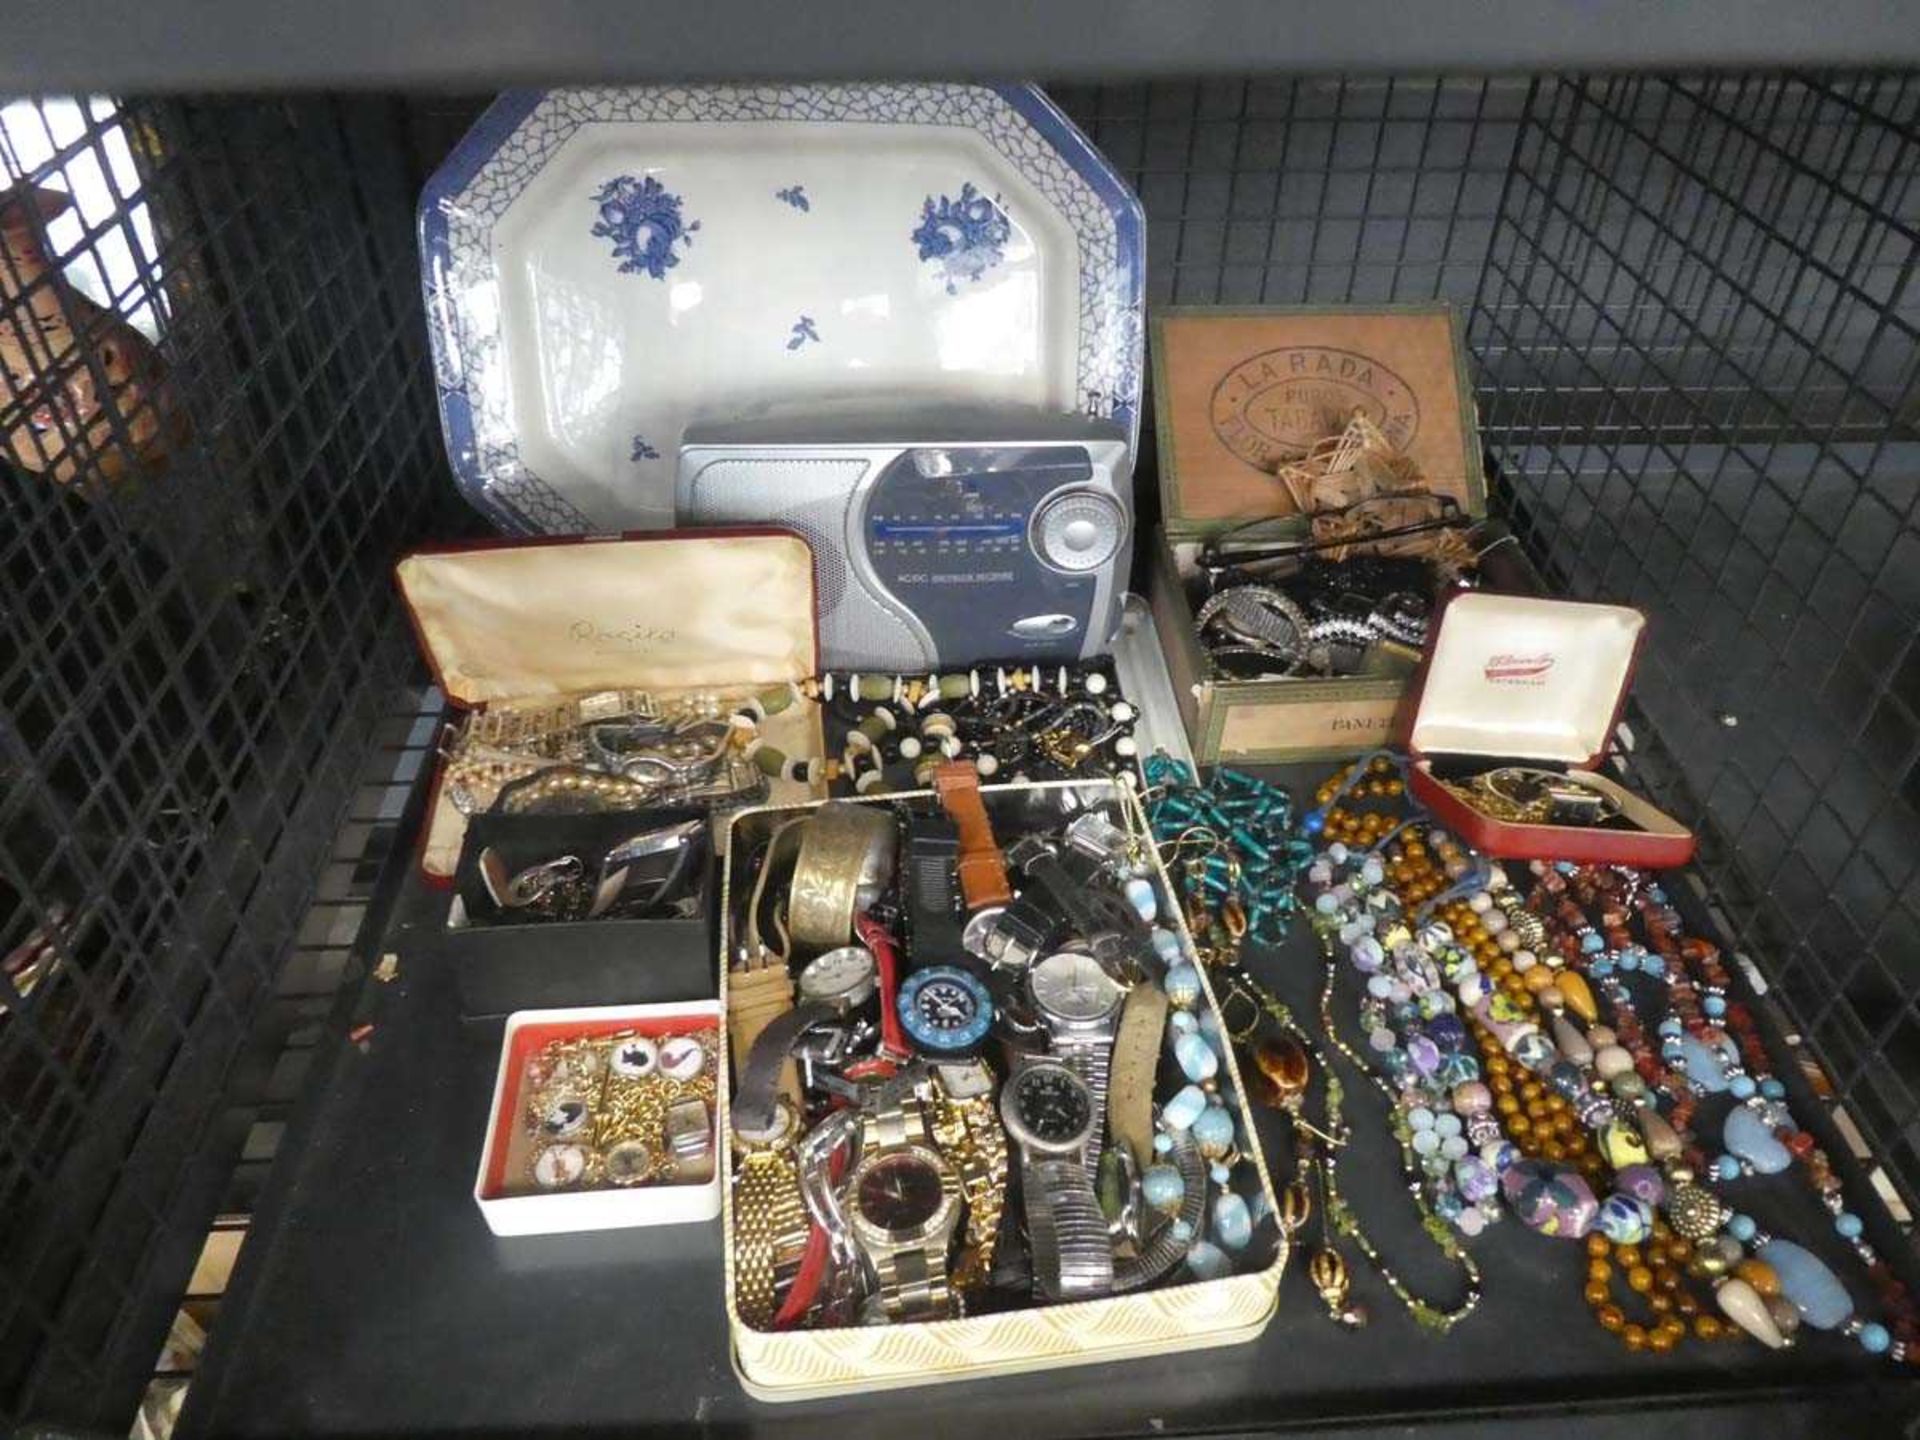 Cage containing costume jewellery, watches, radio and collectible blue and white plate